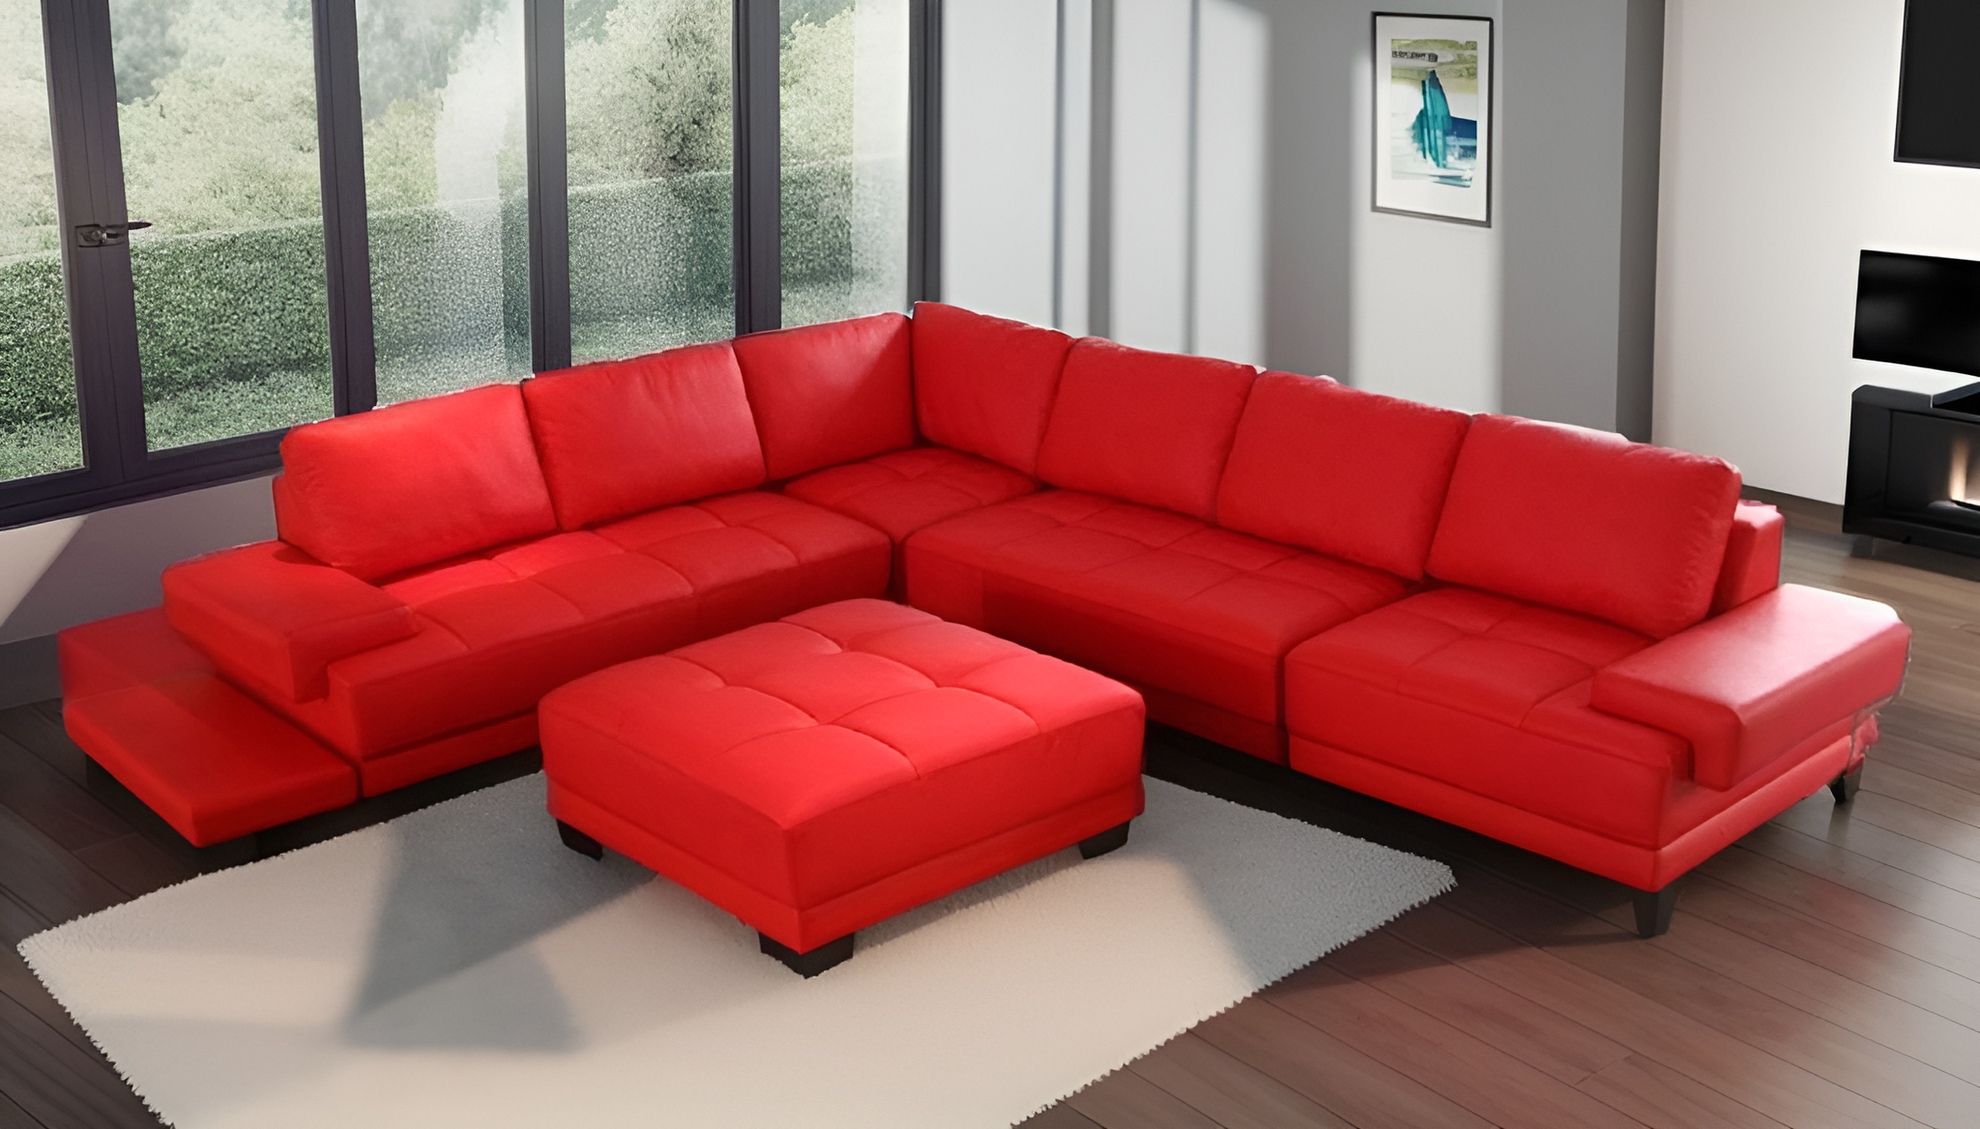 S1035 6pc Sectional Leather Sofa Set With Side Table Stendmar